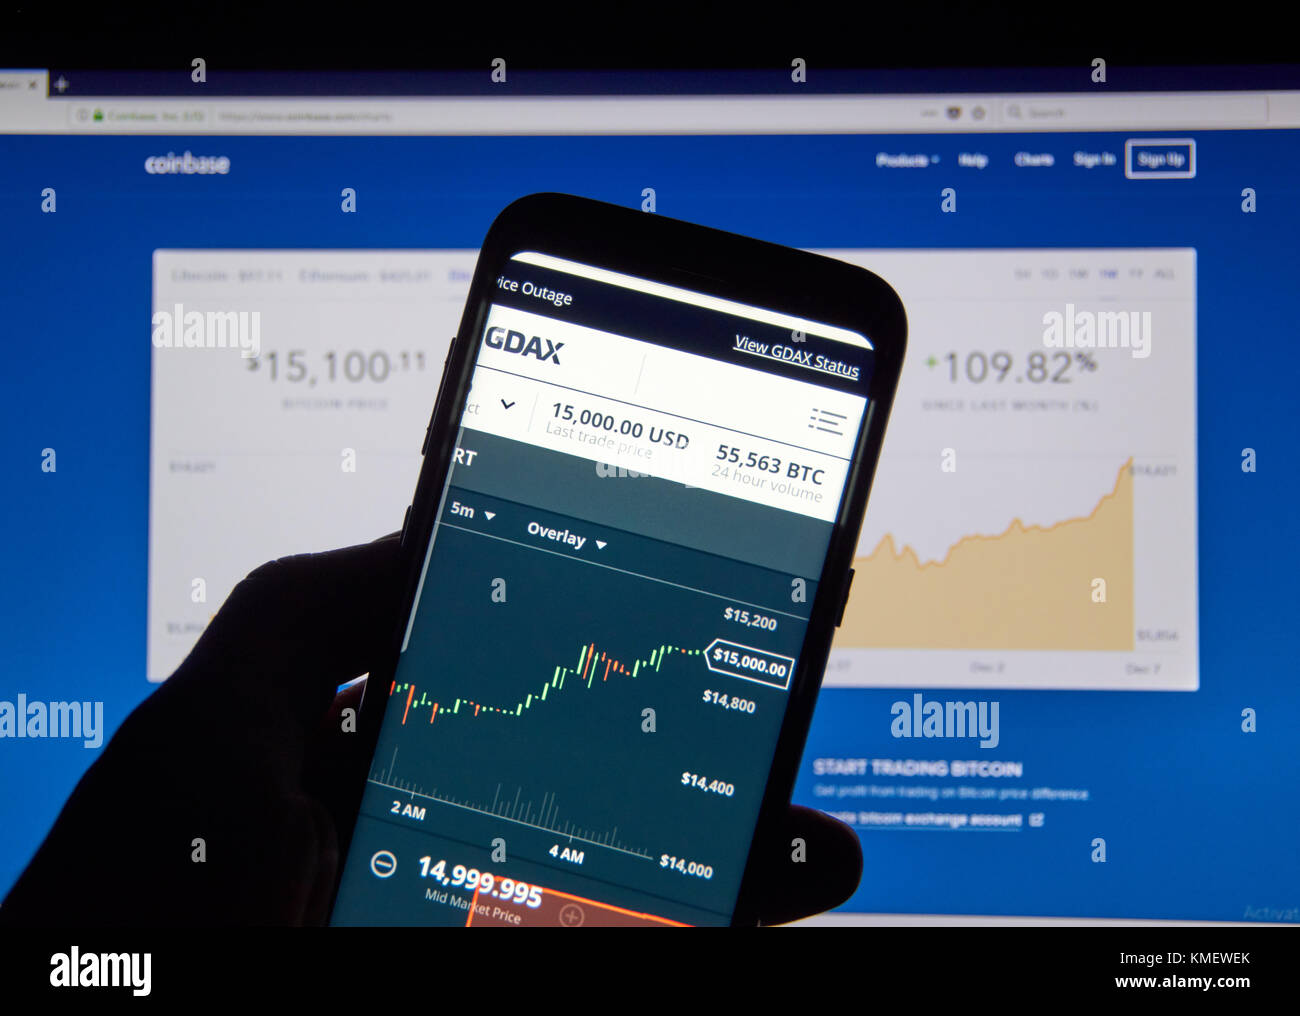 MONTREAL, CANADA - DECEMBER 7, 2017: Bitcoin USD price on Coinbase android app GDAX. GDAX is a trading platform and a service provided by Coinbase, In Stock Photo